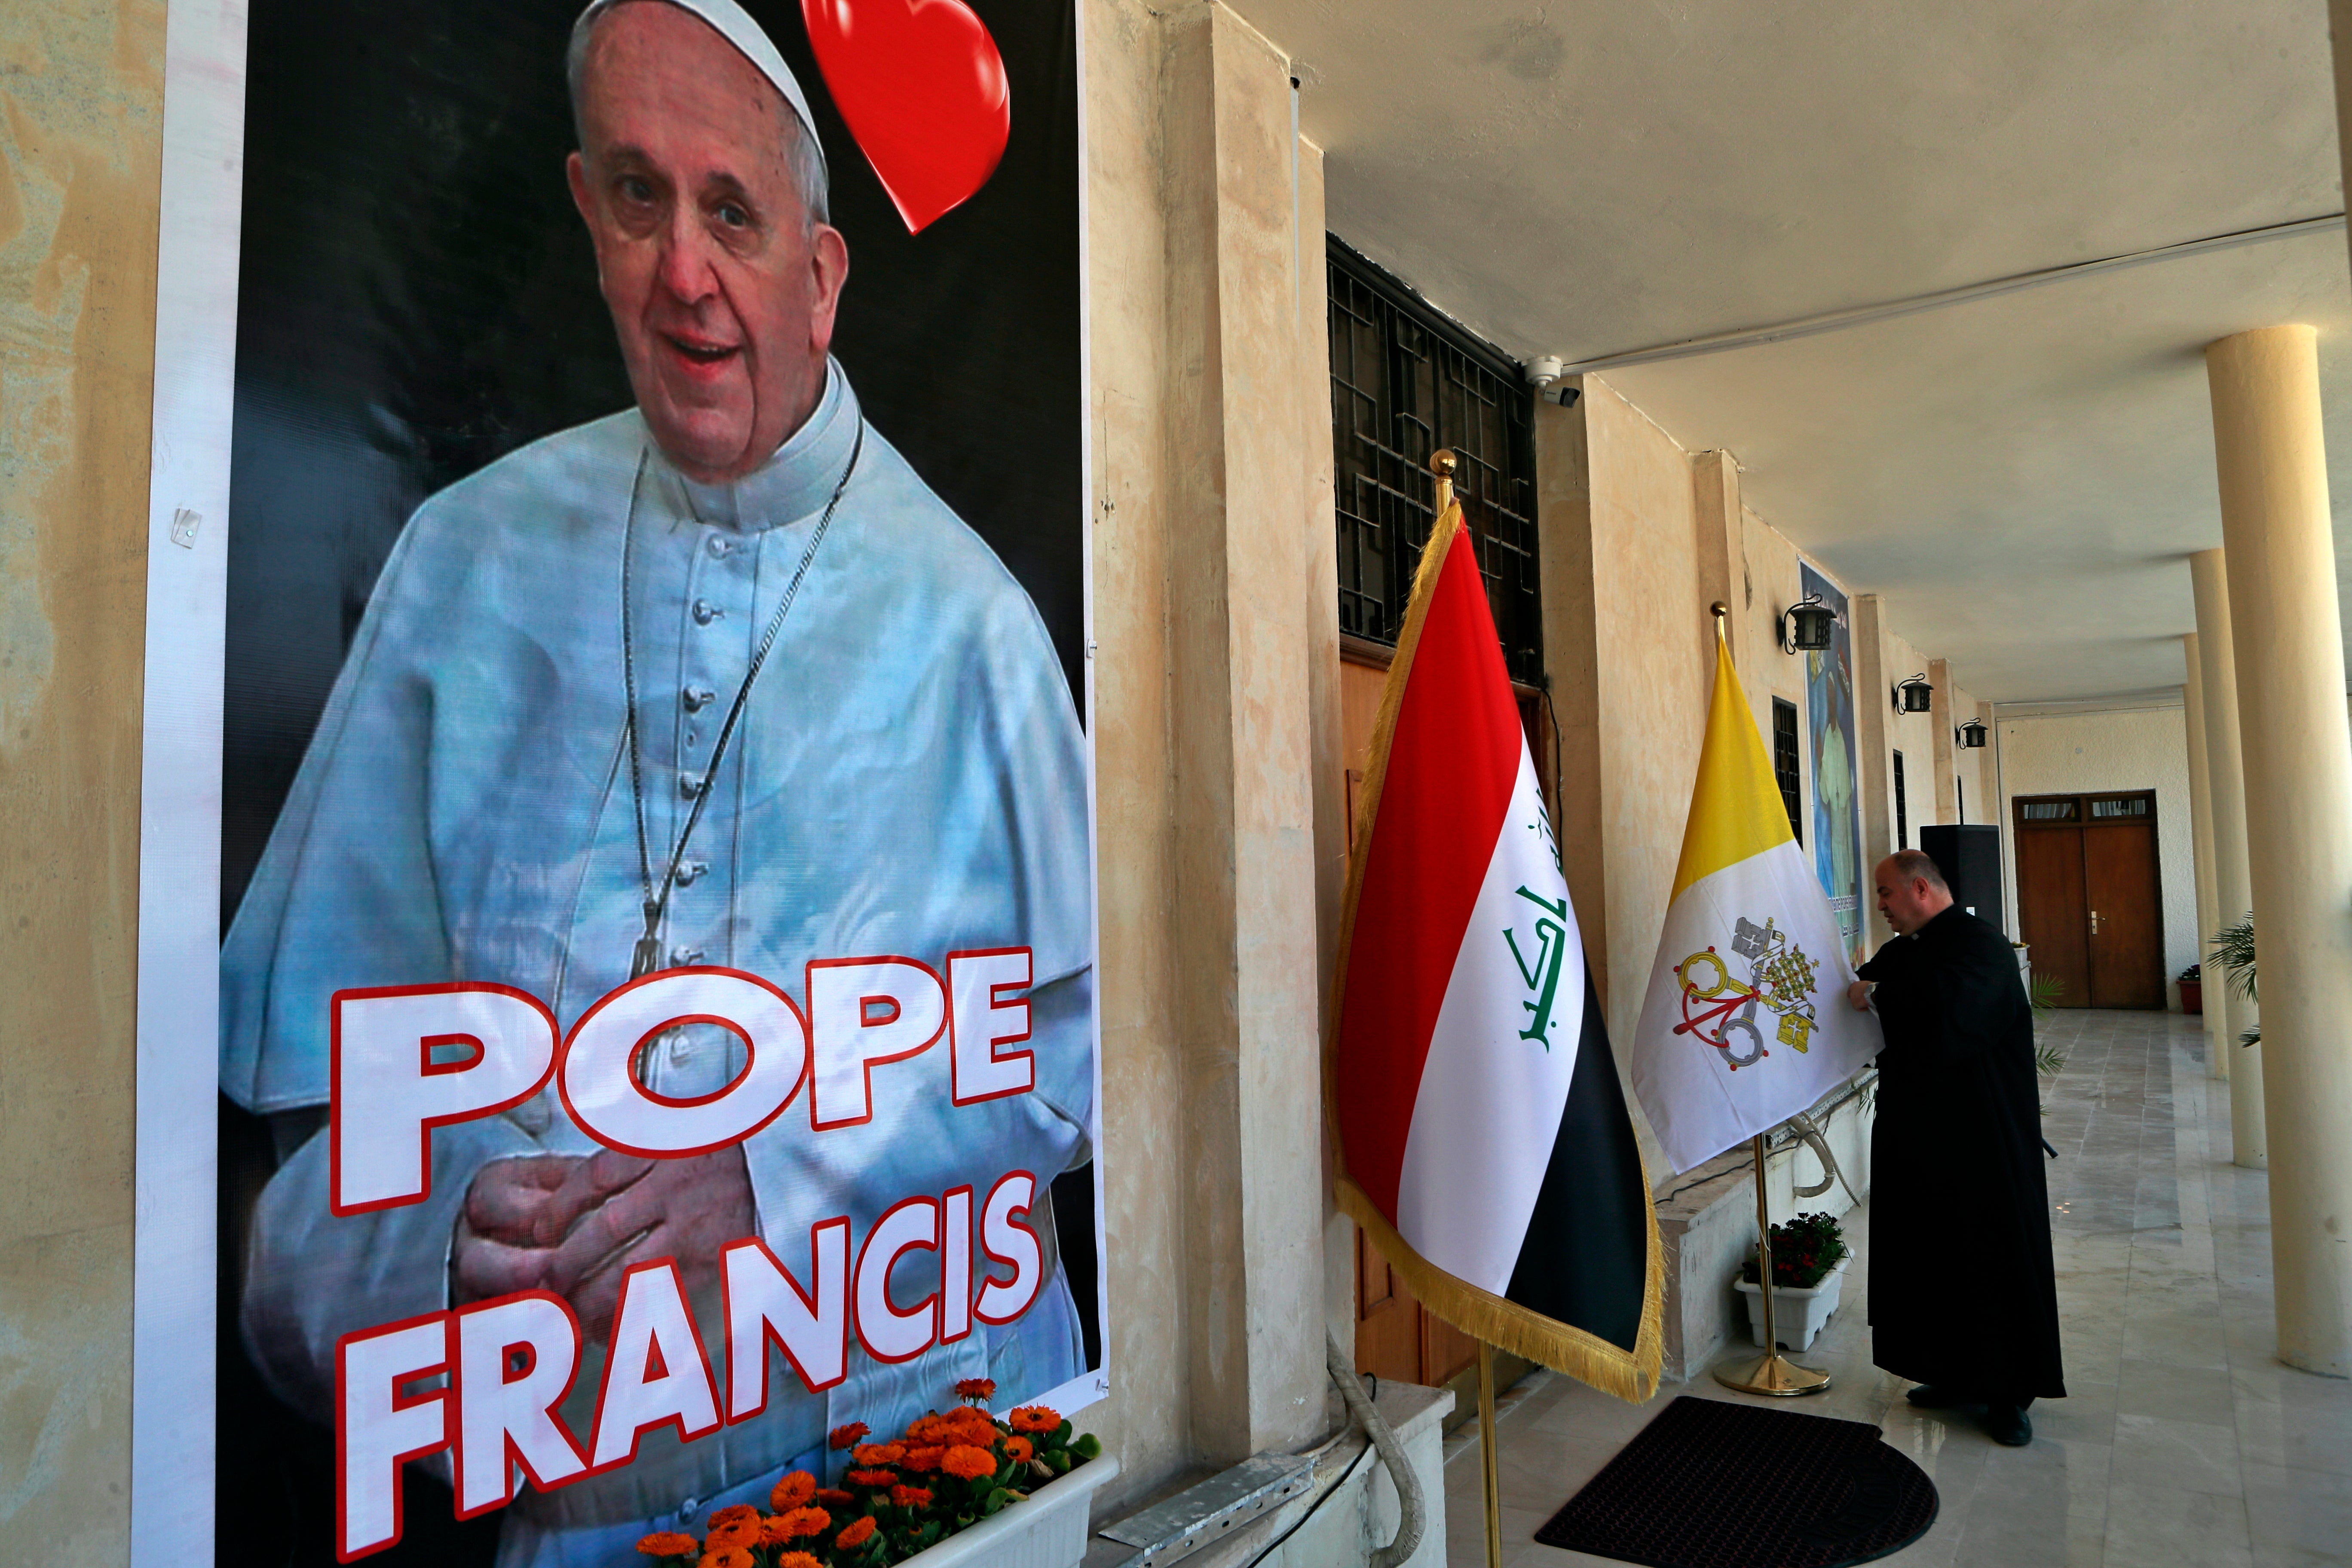 Father Nazeer Dako arranges a Vatican flag to welcome Pope Francis at St Joseph’s Chaldean Church in Baghdad